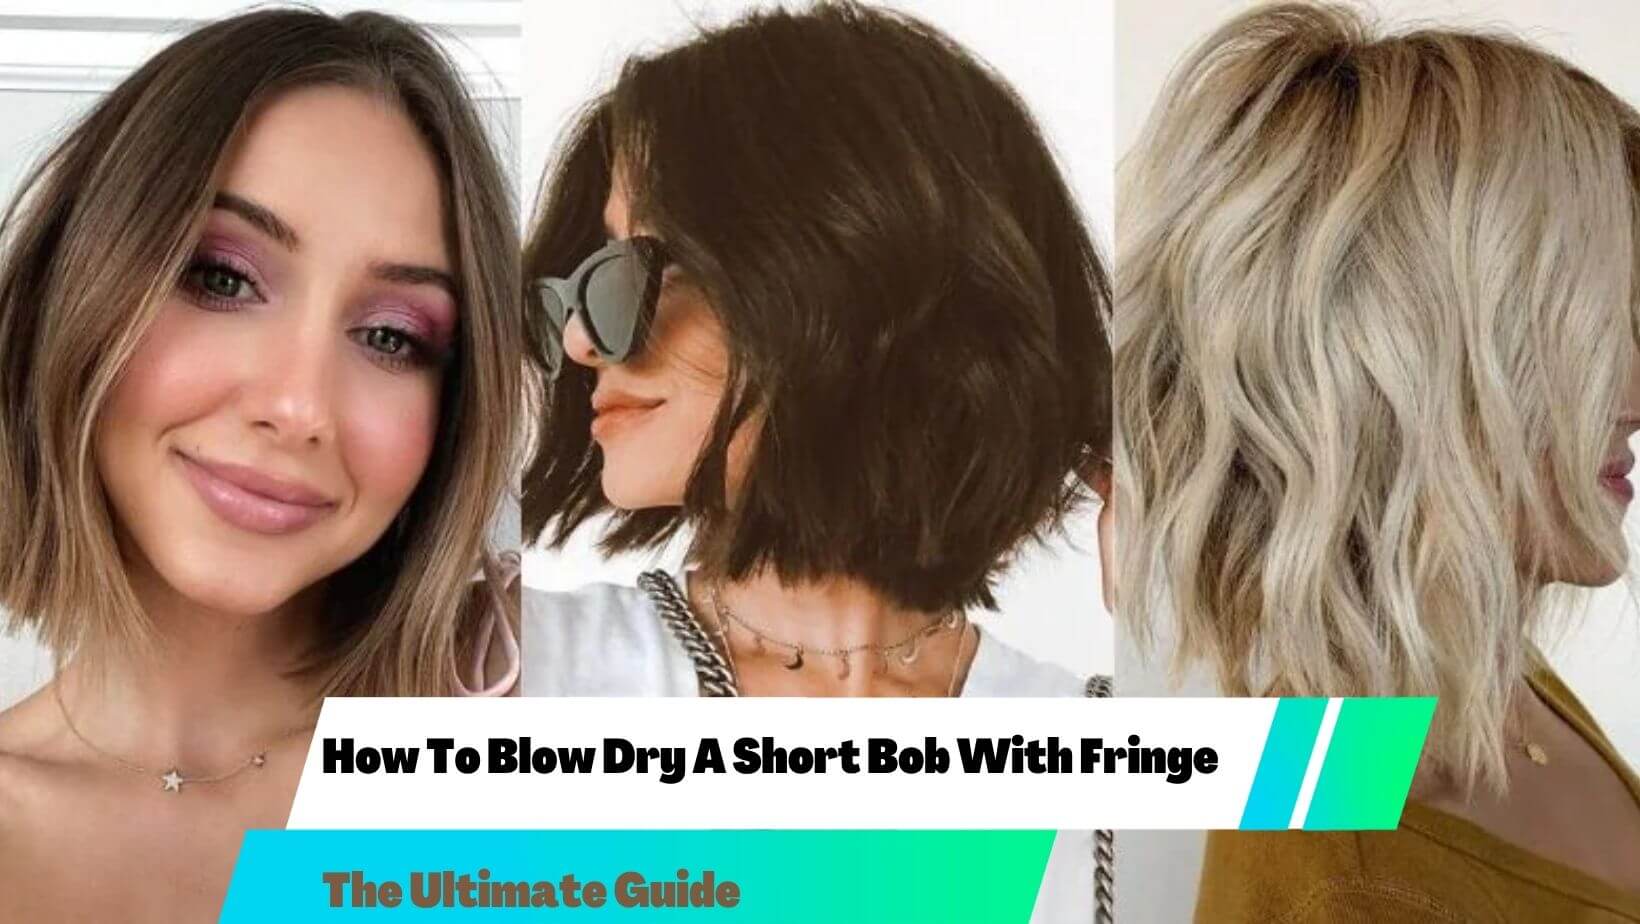 How To Blow Dry A Short Bob With Fringe